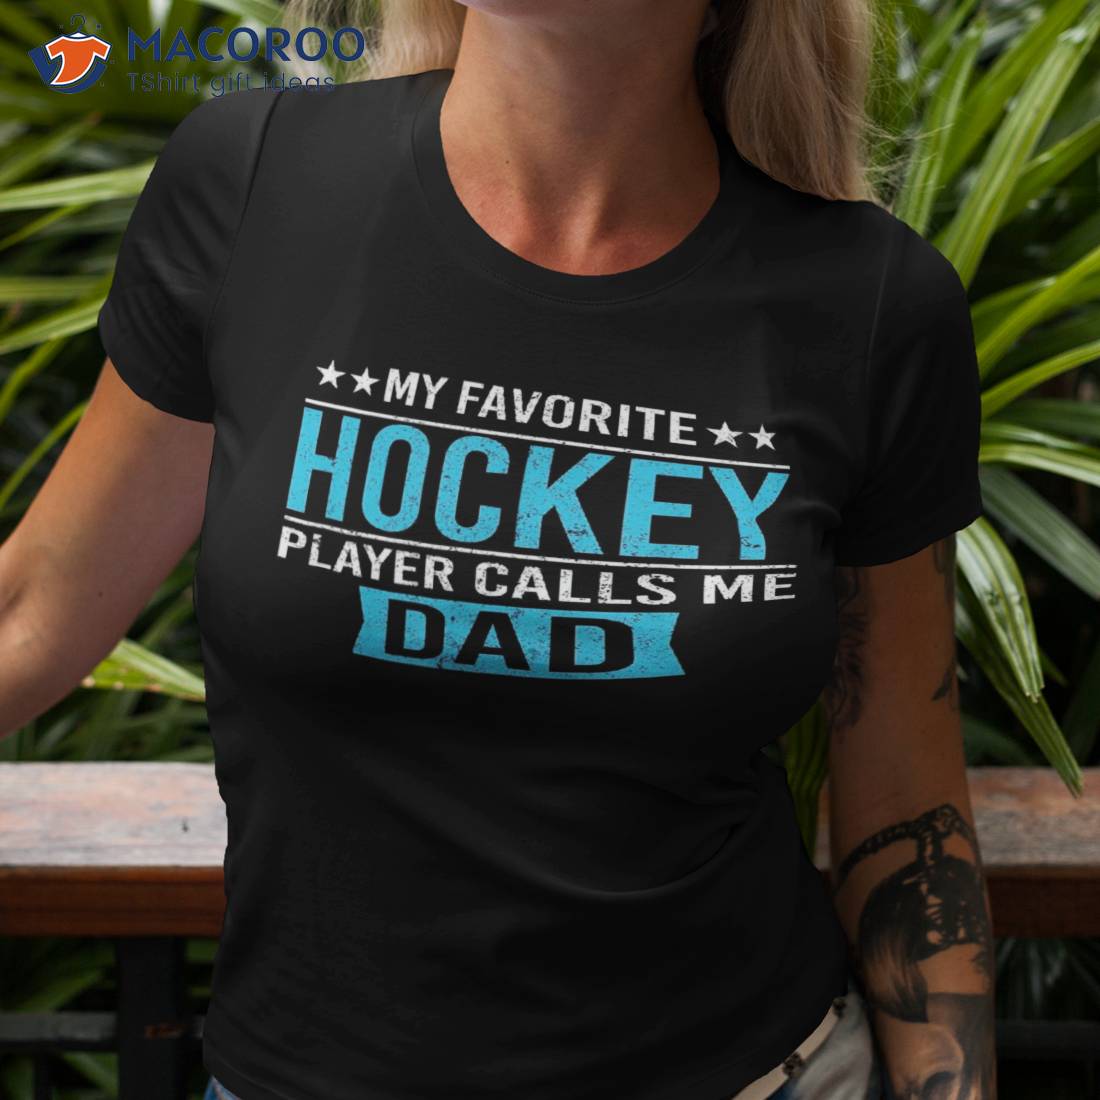 Hockey Player T-Shirts for Sale